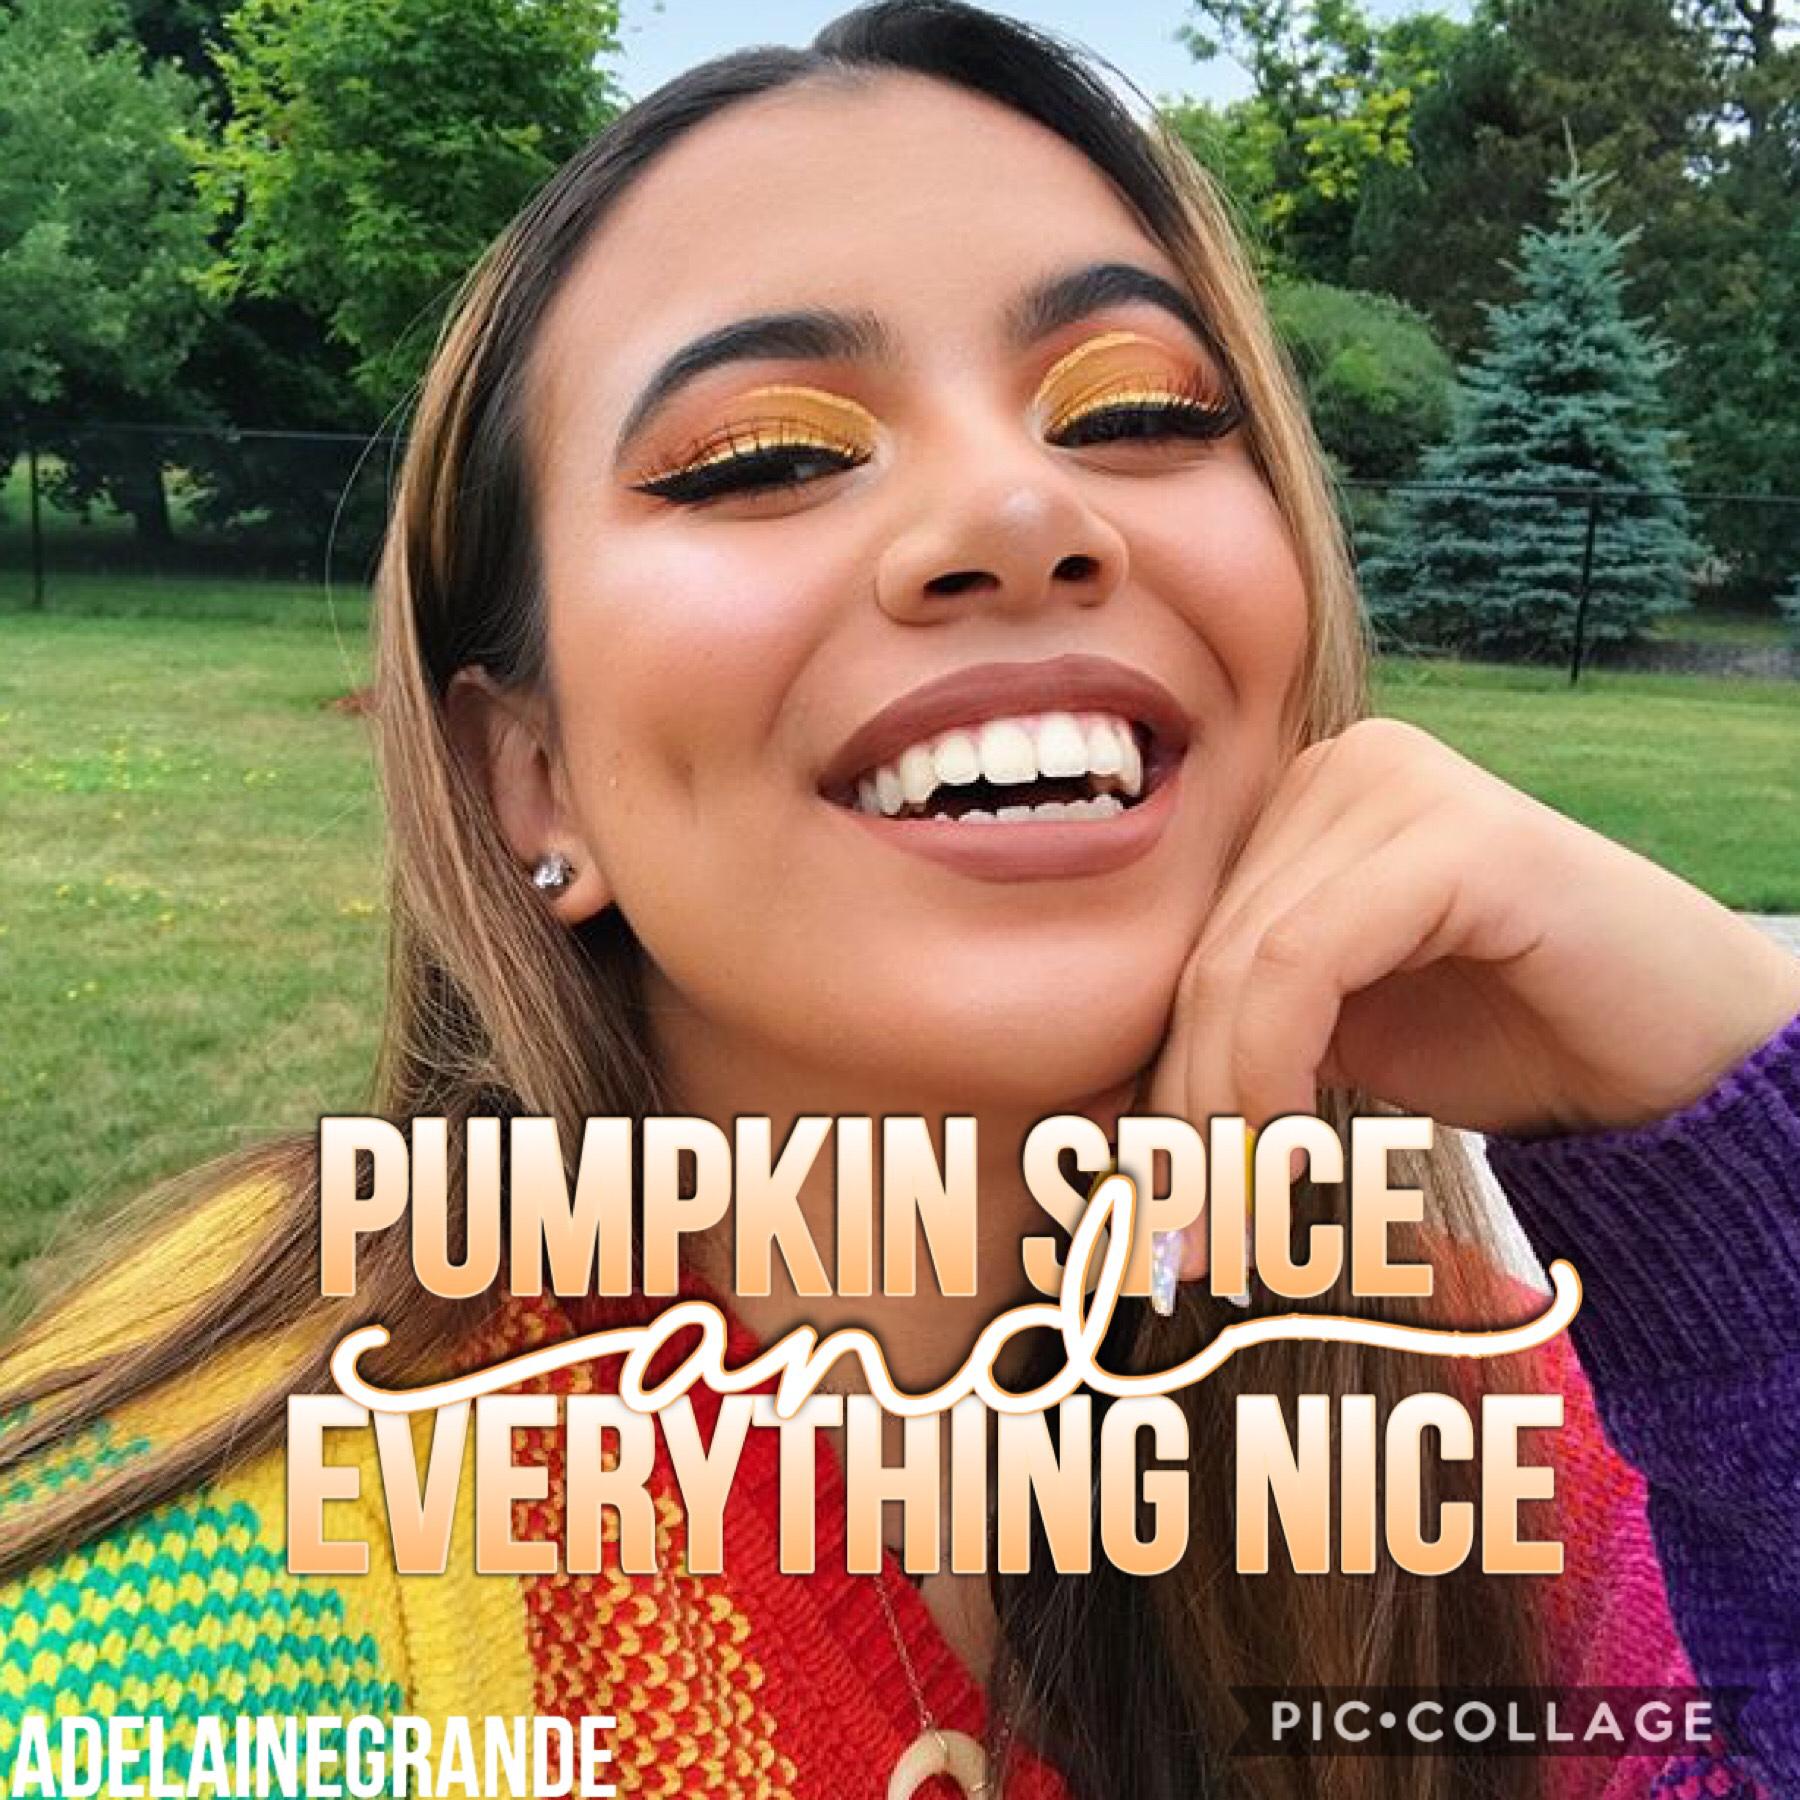 who else is excited for fall!?🍂🎃☁️